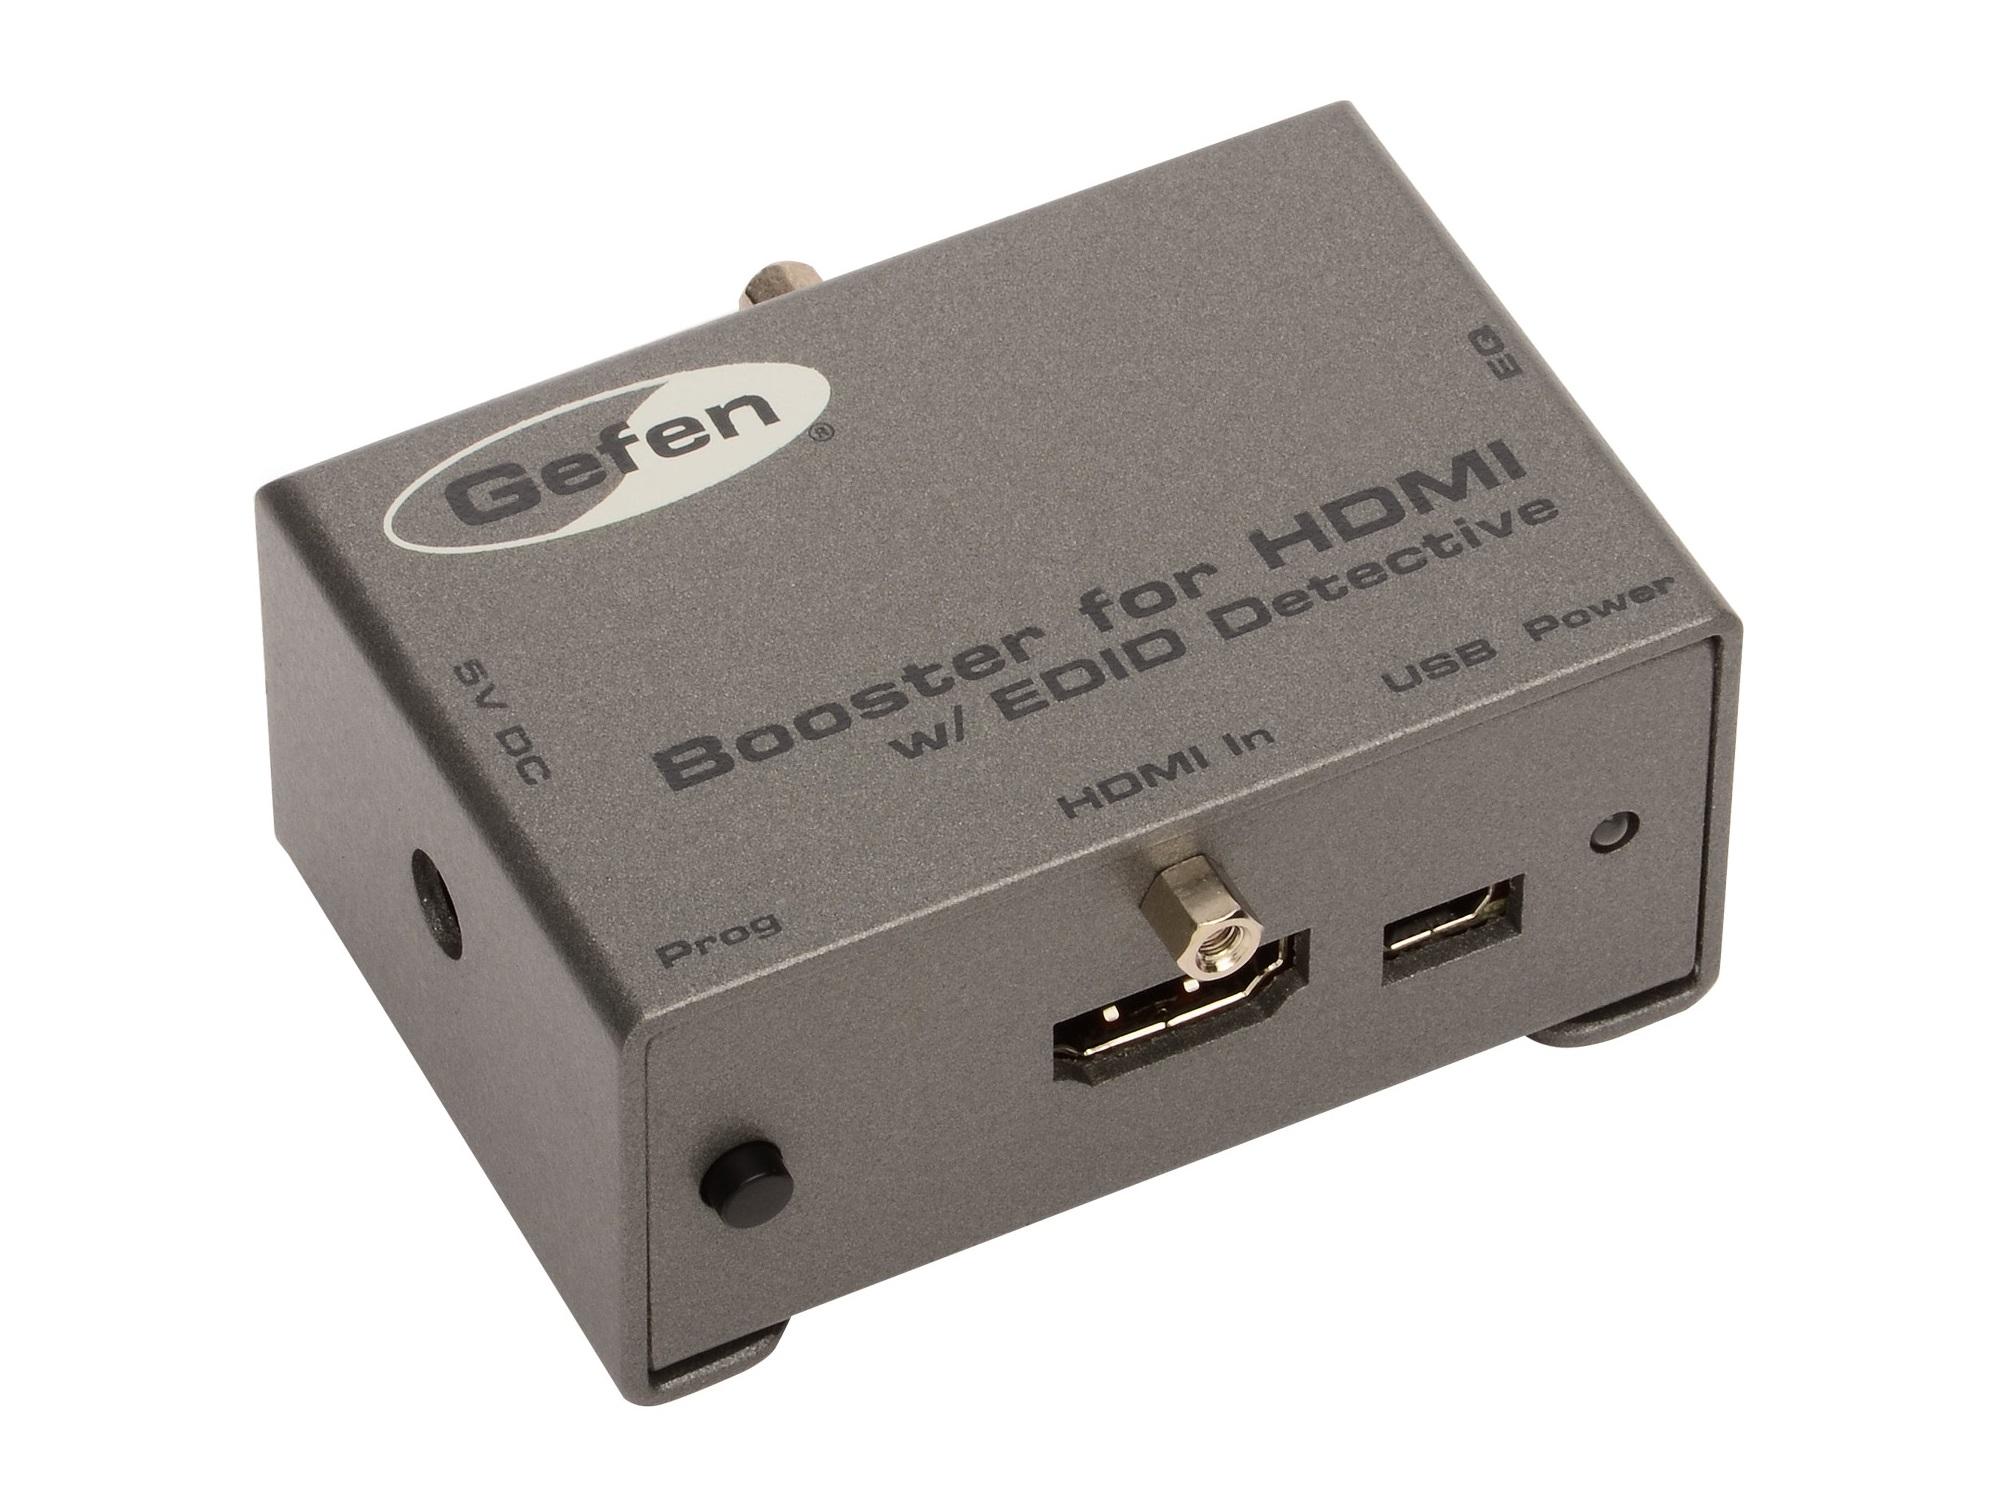 Gefen EXT-HDBOOST-141 Booster for HDMI with EDID Detective